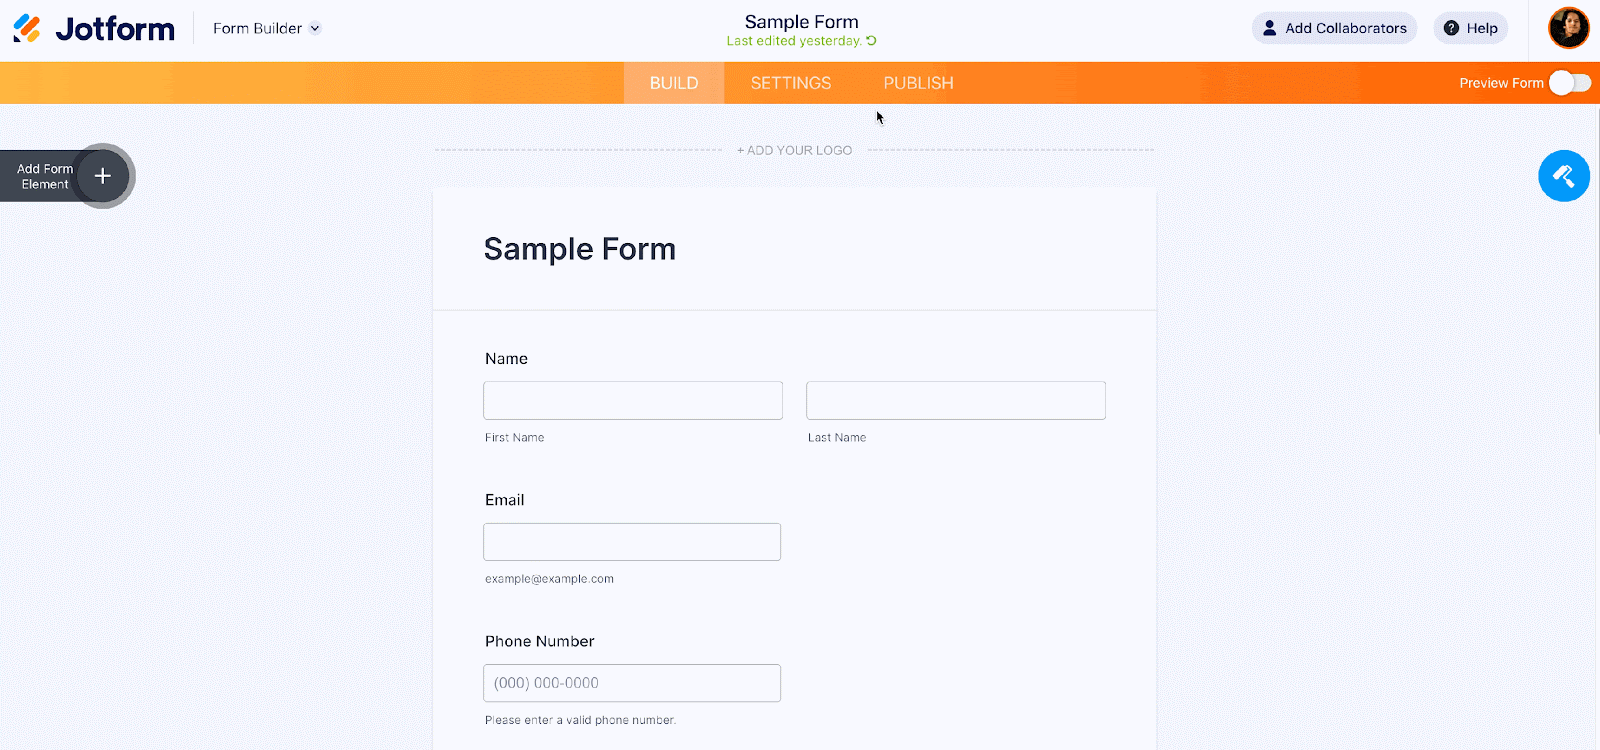 Saving the form and publish it without loosing it Image 2 Screenshot 41